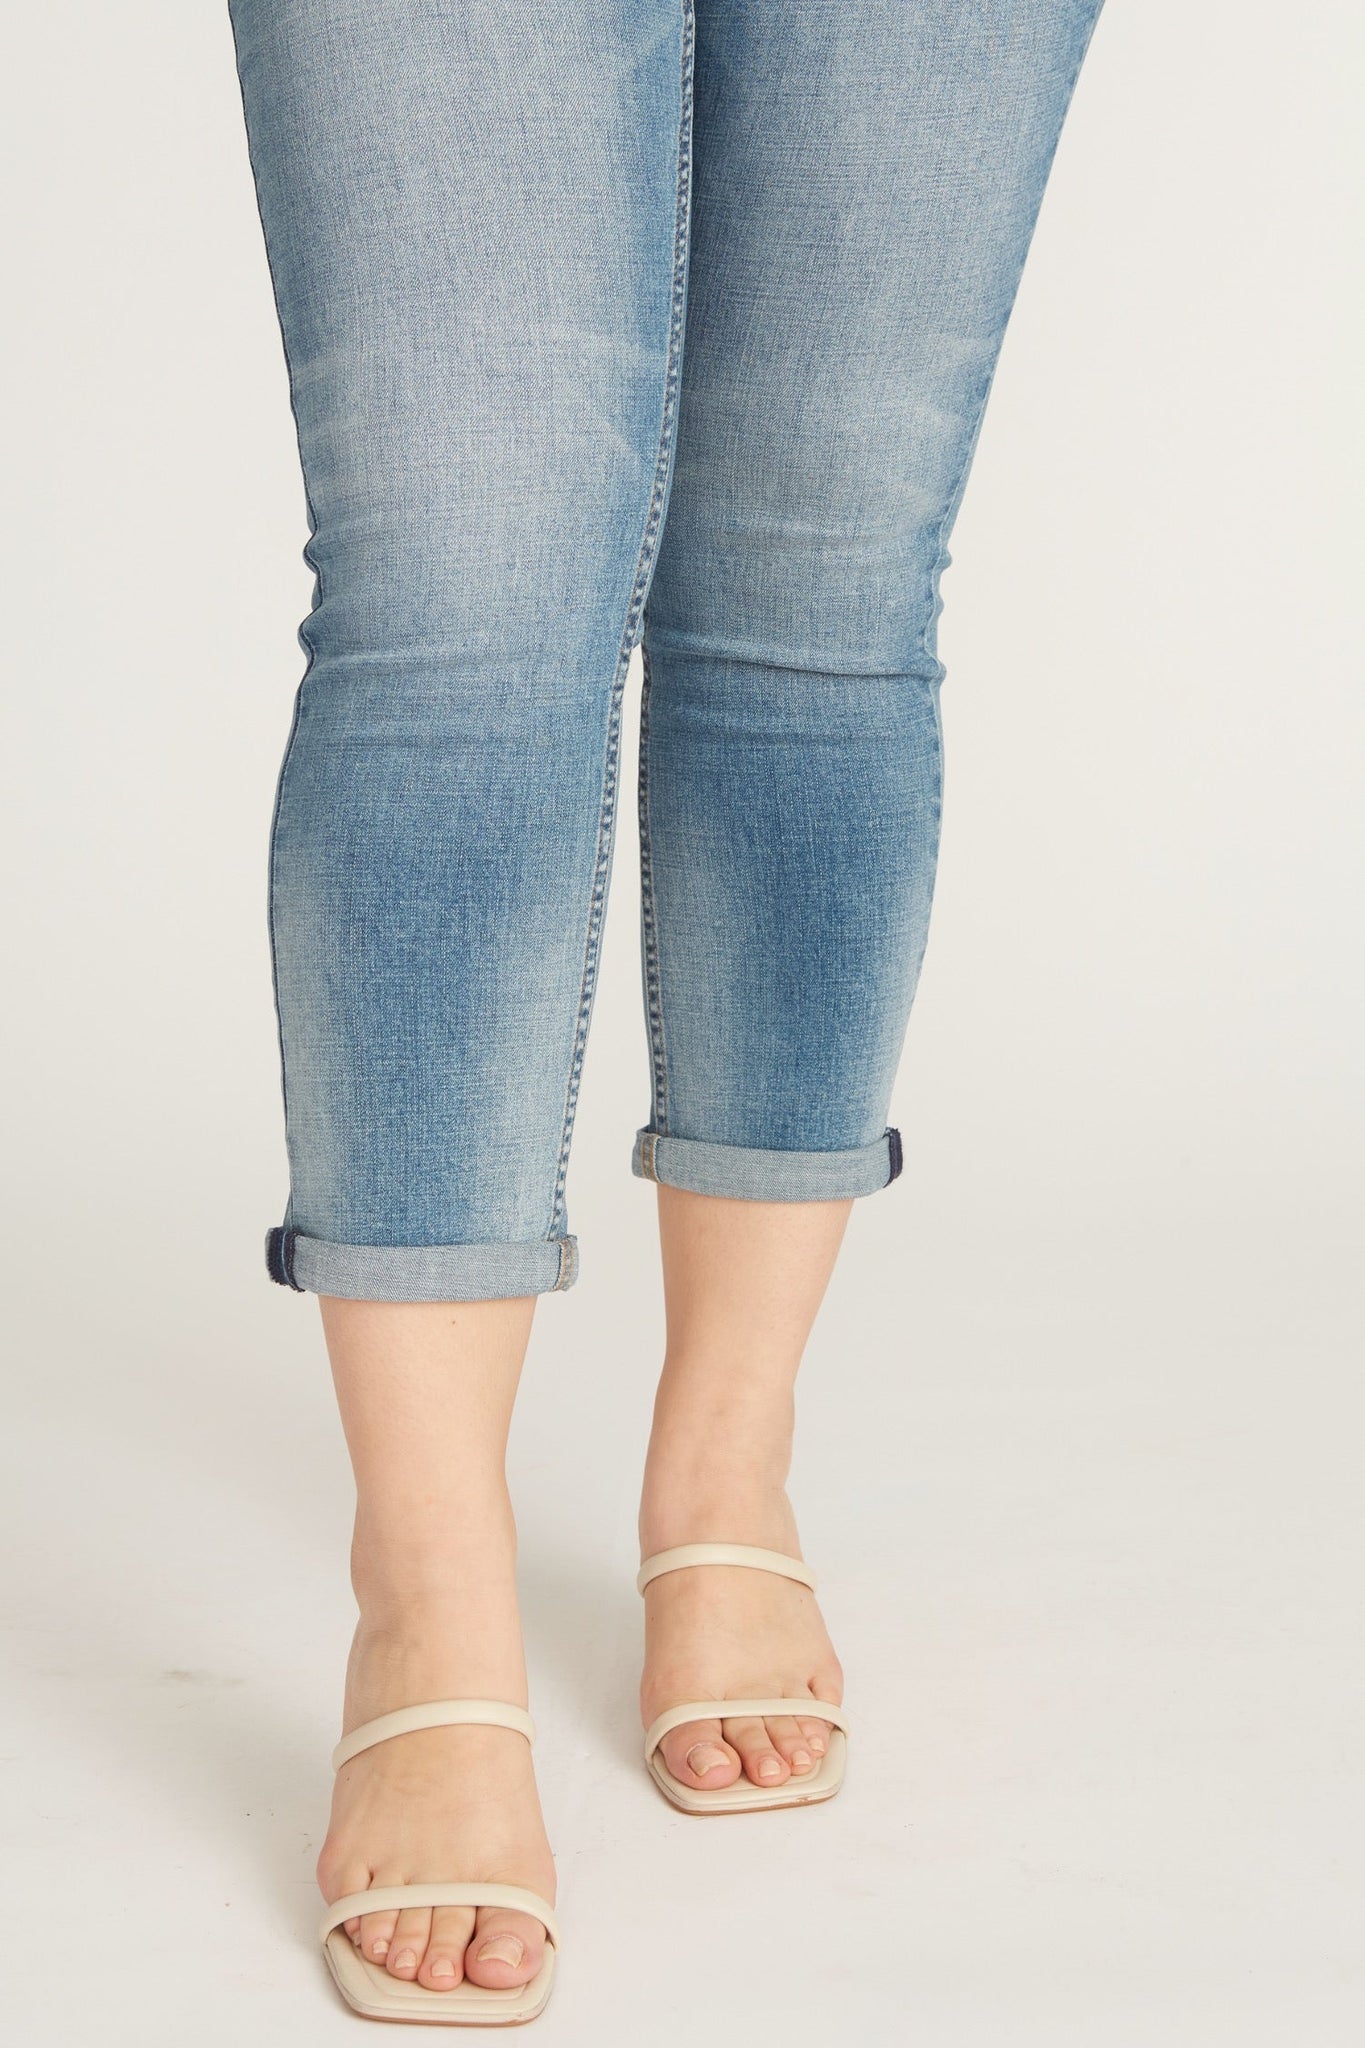 Load image into Gallery viewer, Thompson Tomboy Jean [Plus Size] - Medium Wash
